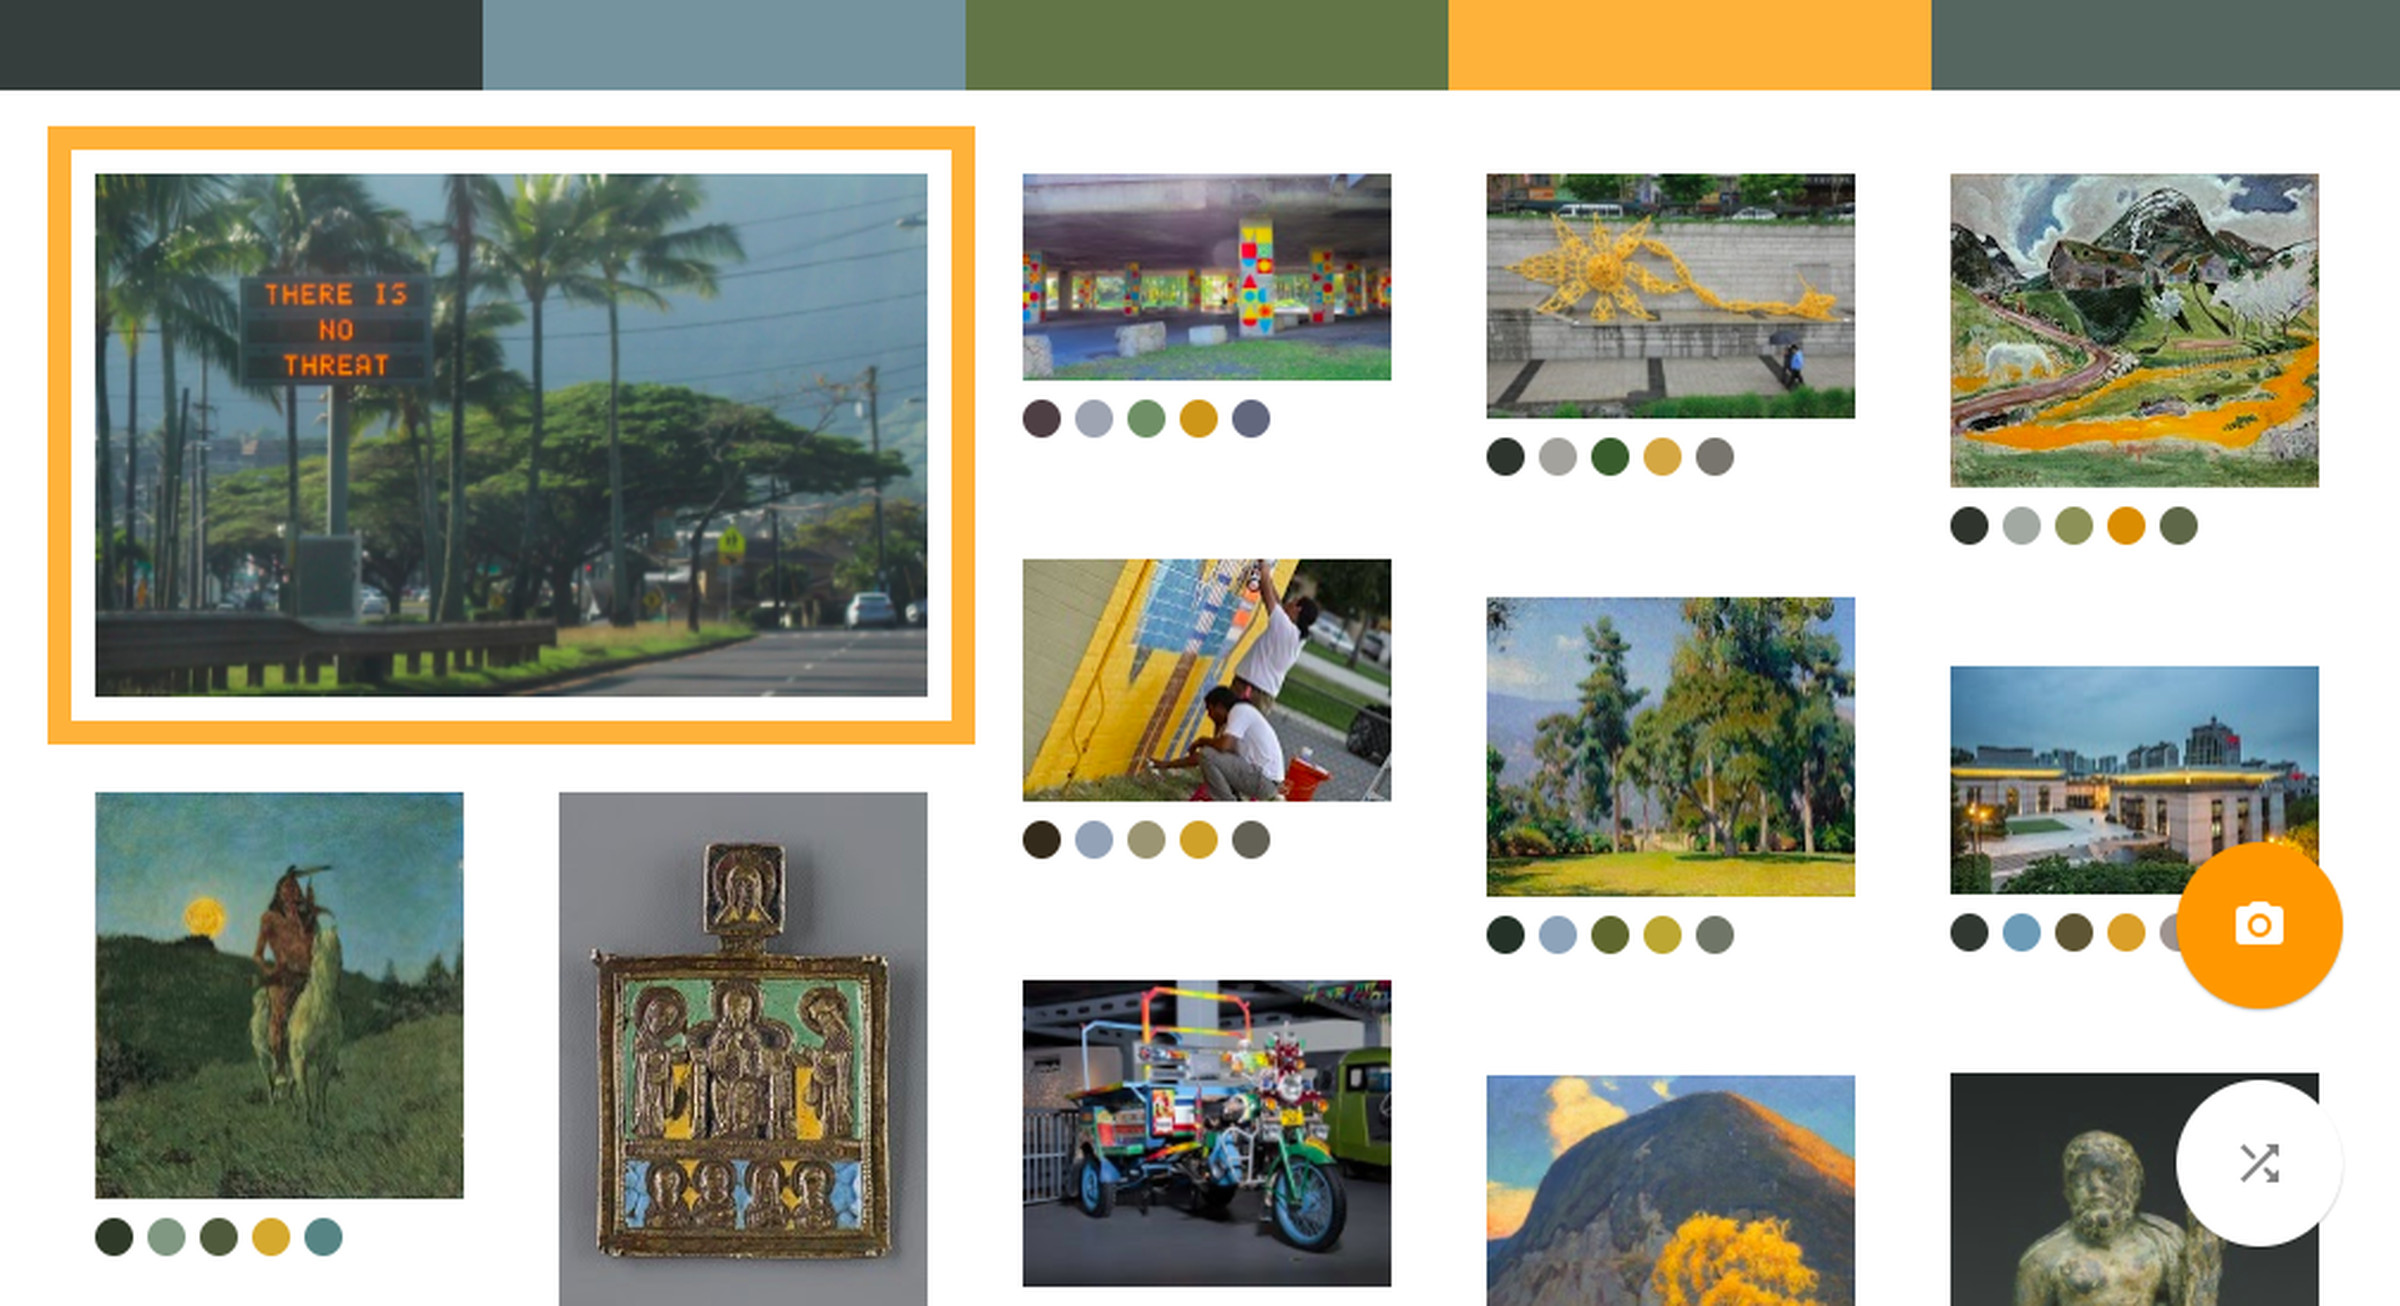 Art Palette lets you match the colors in photos you upload to those of famous artworks.